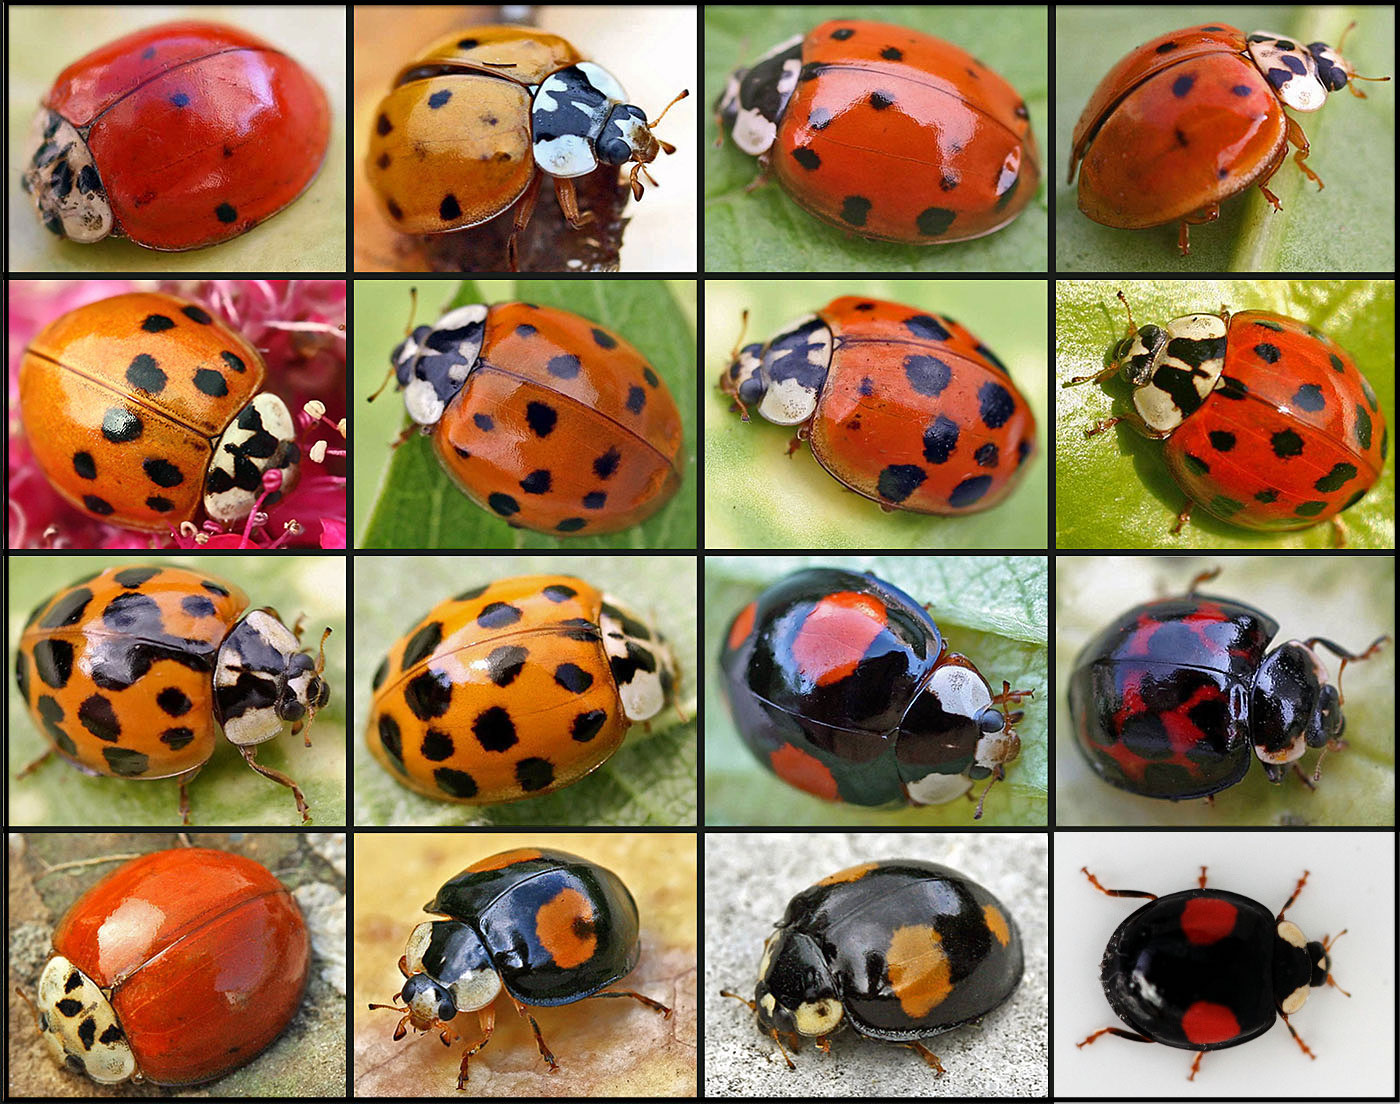 How can you tell how old a ladybug is?